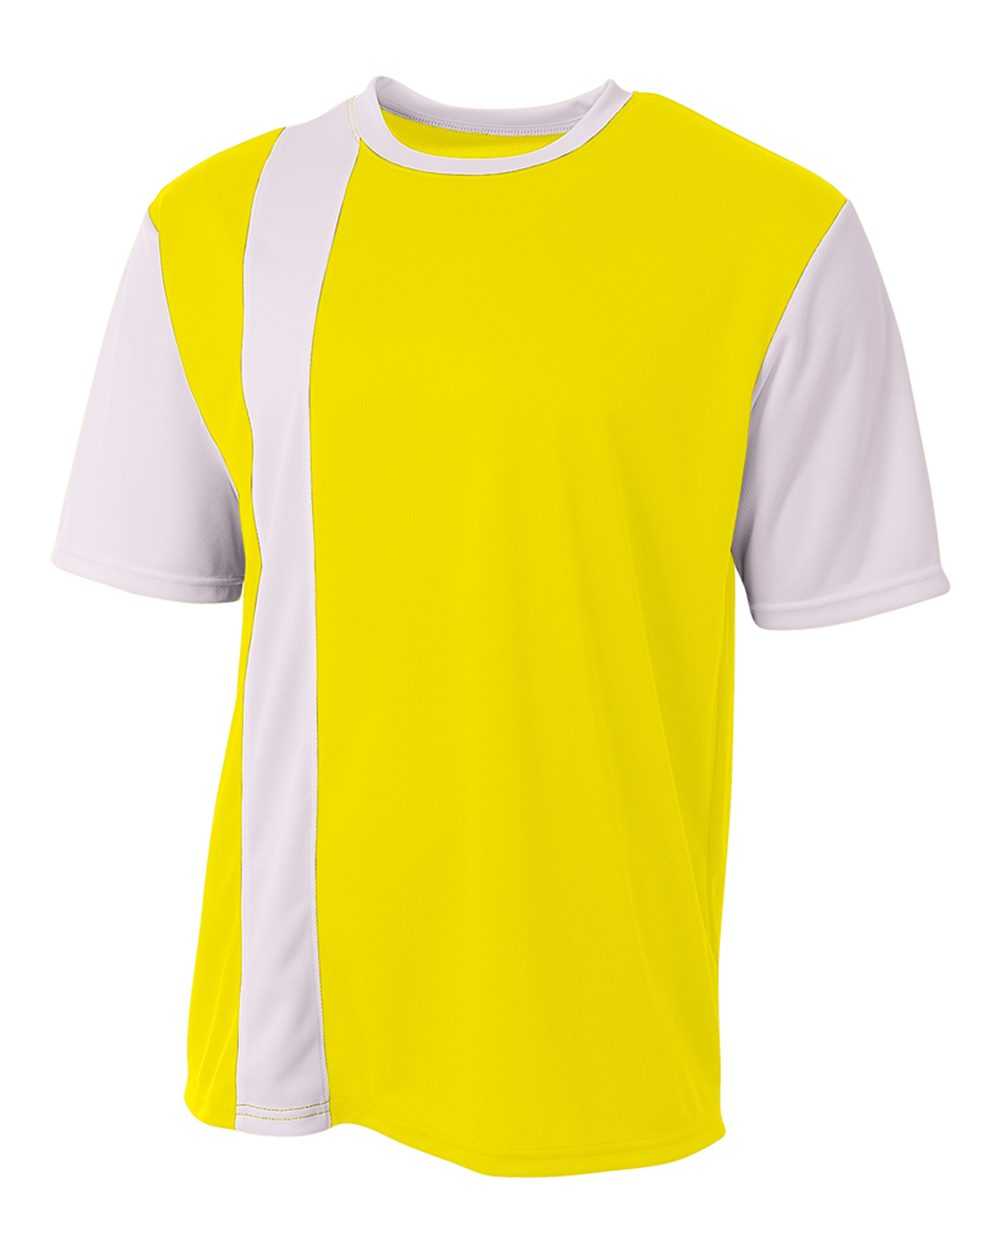 A4 NB3016 Legend Soccer Jersey - Safety Yellow White - HIT a Double